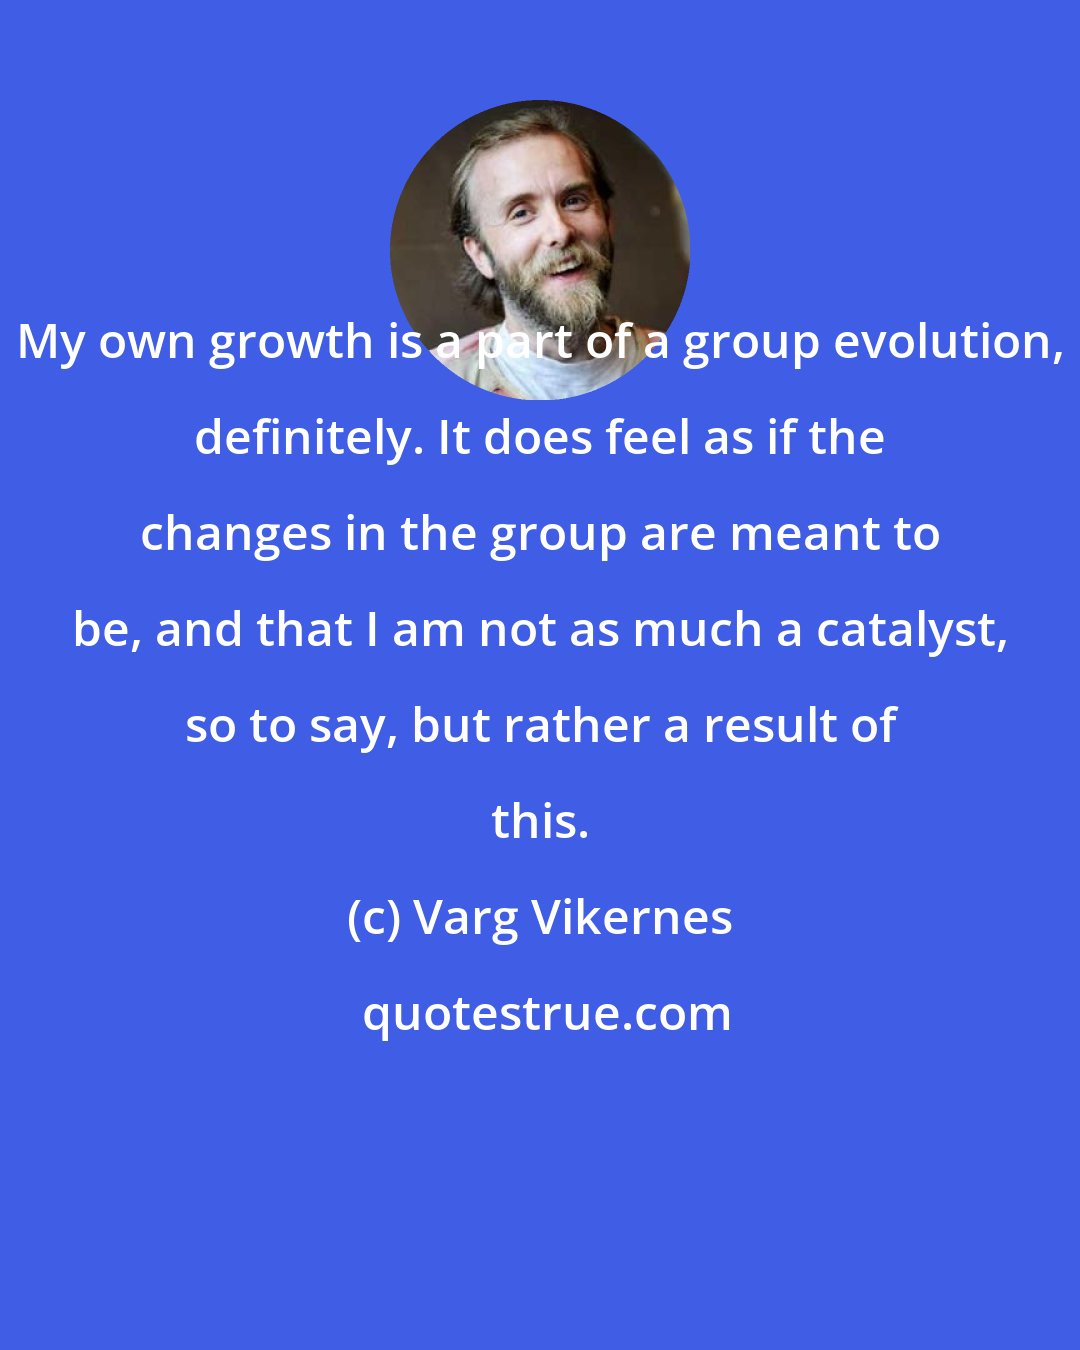 Varg Vikernes: My own growth is a part of a group evolution, definitely. It does feel as if the changes in the group are meant to be, and that I am not as much a catalyst, so to say, but rather a result of this.